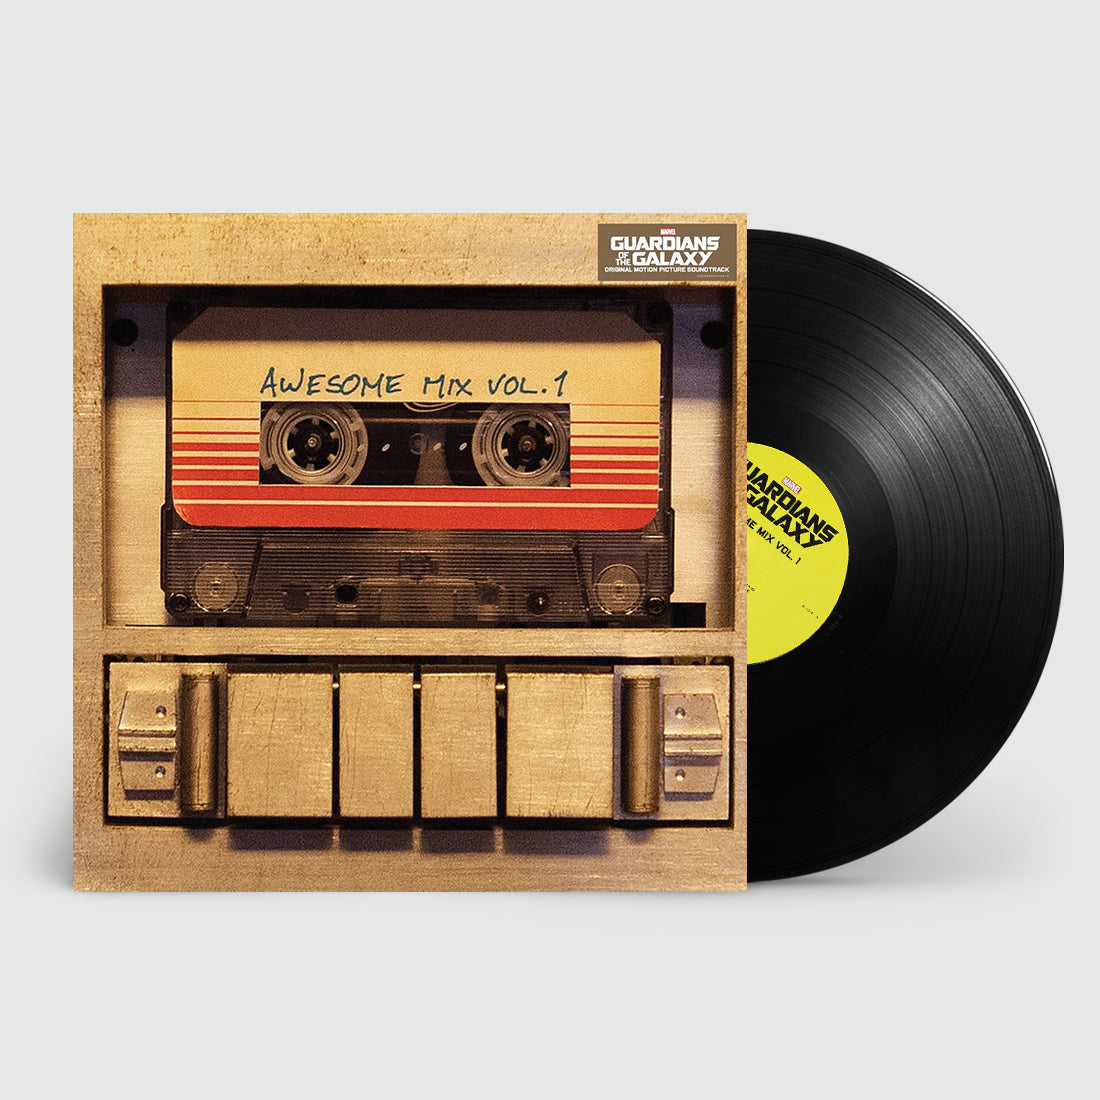 Various Artists - Guardians of the Galaxy - Awesome Mix Vol. 1: Vinyl LP